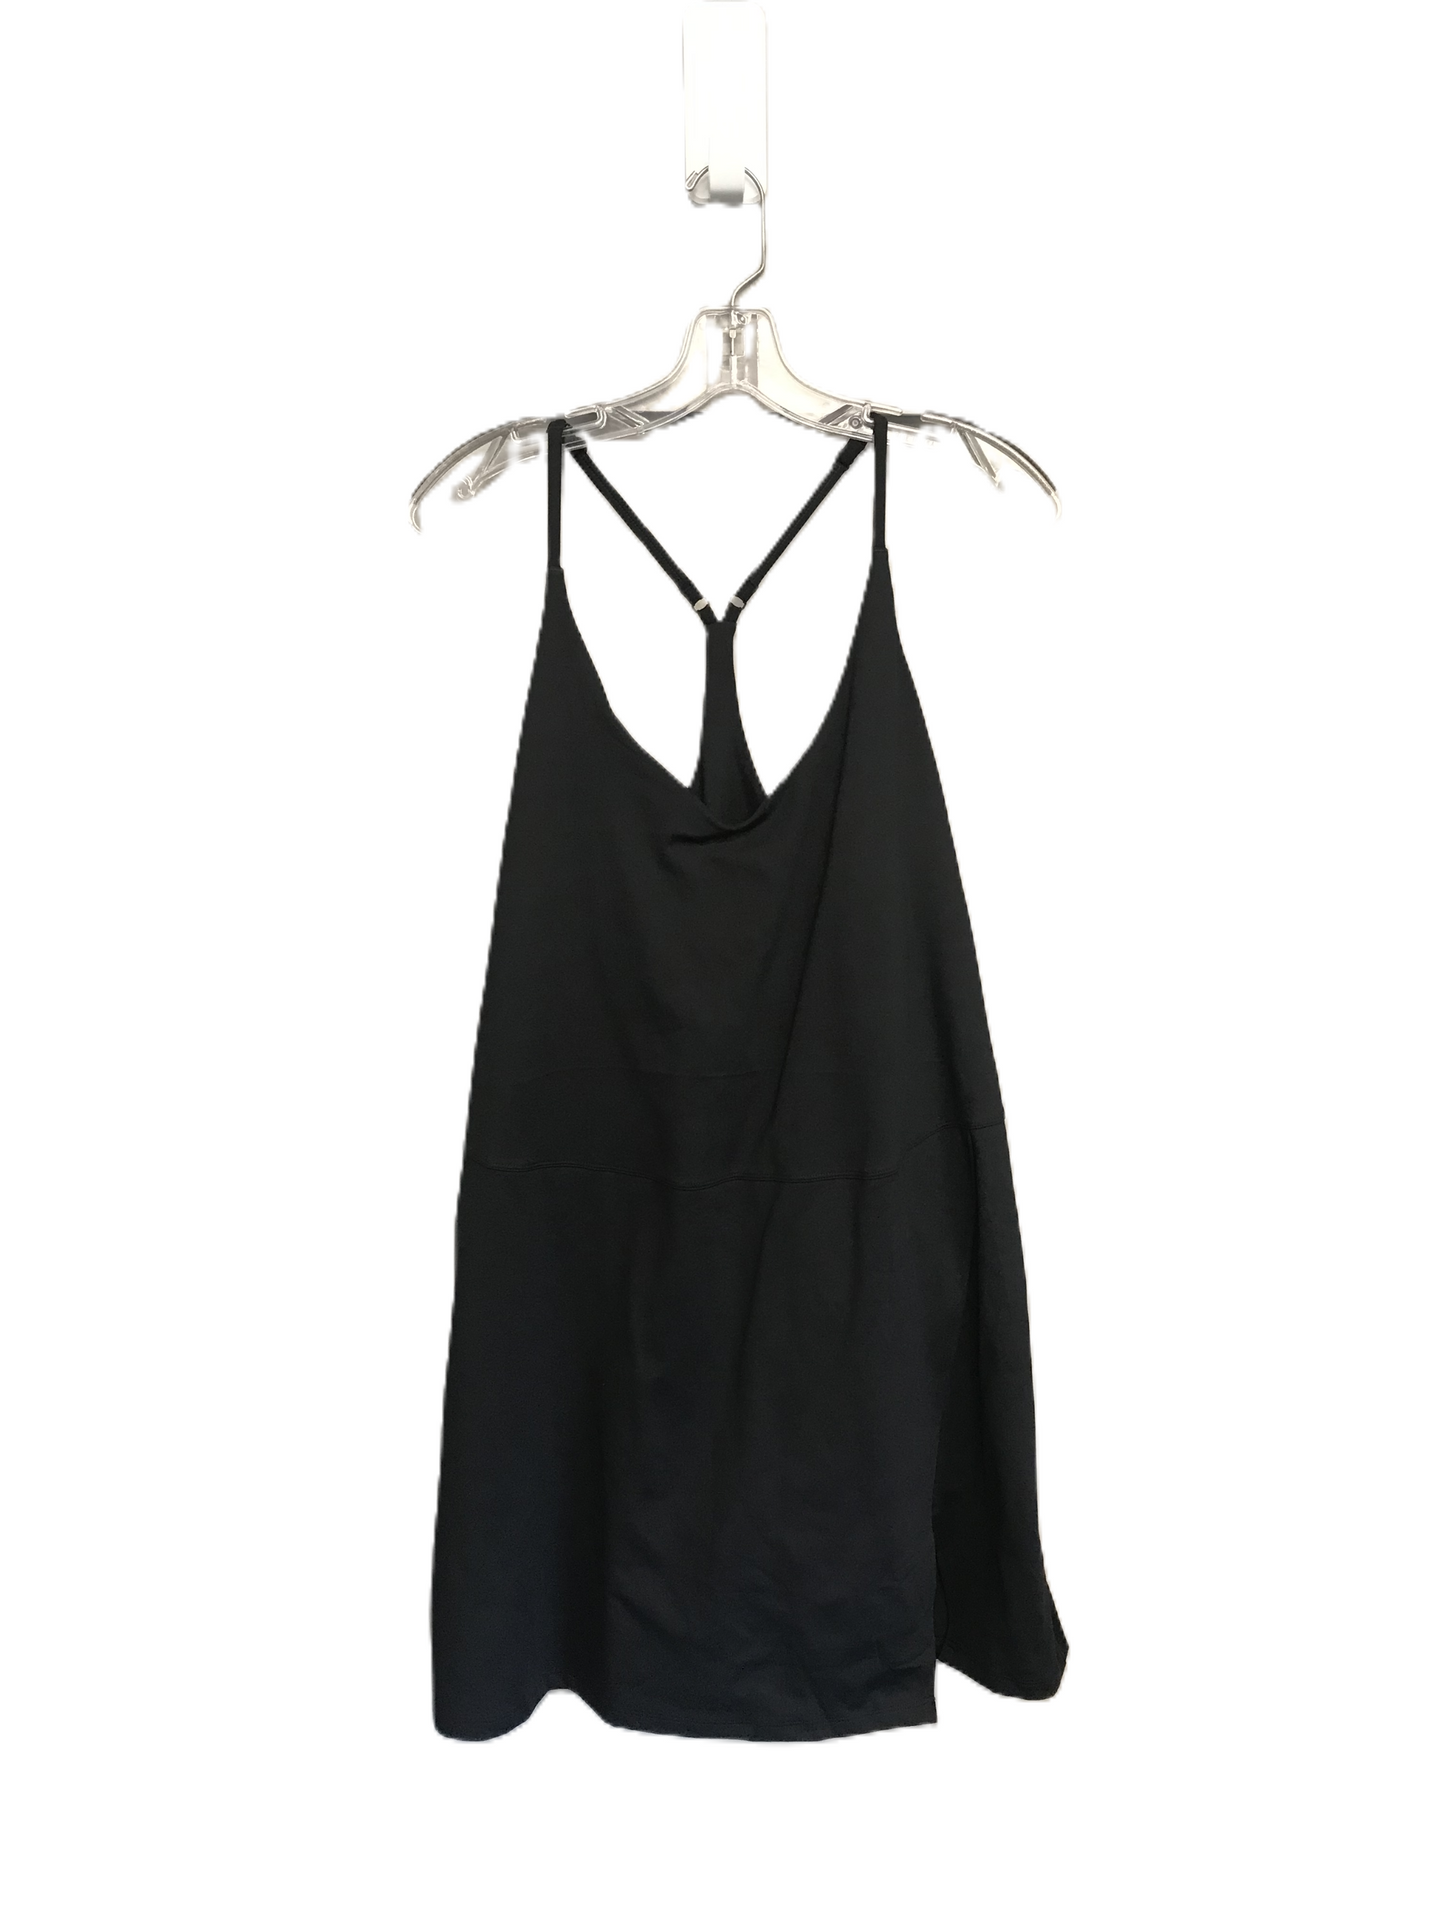 Black Athletic Dress By Girlfriend Collective Size: 1x